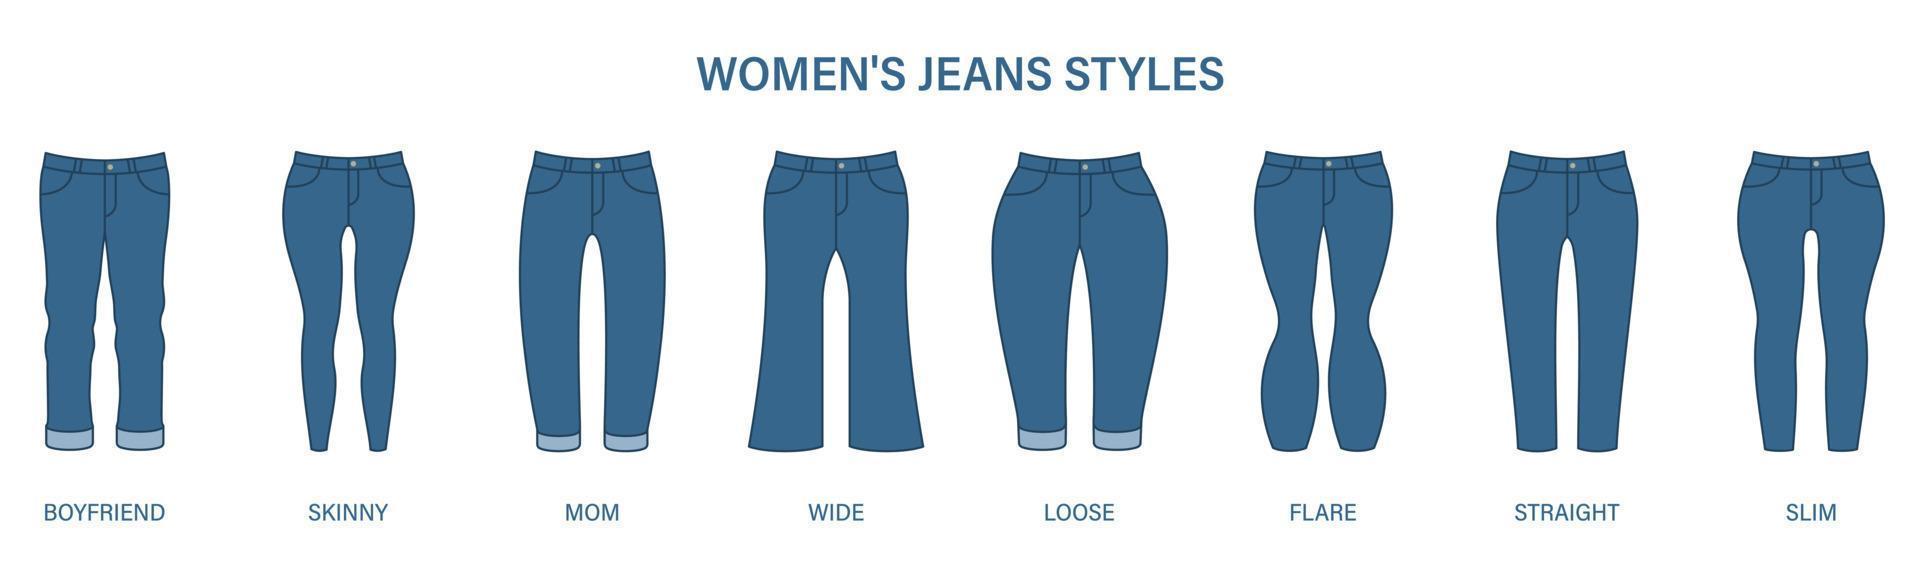 https://static.vecteezy.com/system/resources/previews/006/595/408/non_2x/type-of-woman-denim-pants-blue-women-trousers-style-skinny-boyfriend-loose-slim-straight-mom-flare-wide-jeans-silhouette-pictogram-fashion-pants-isolated-illustration-vector.jpg